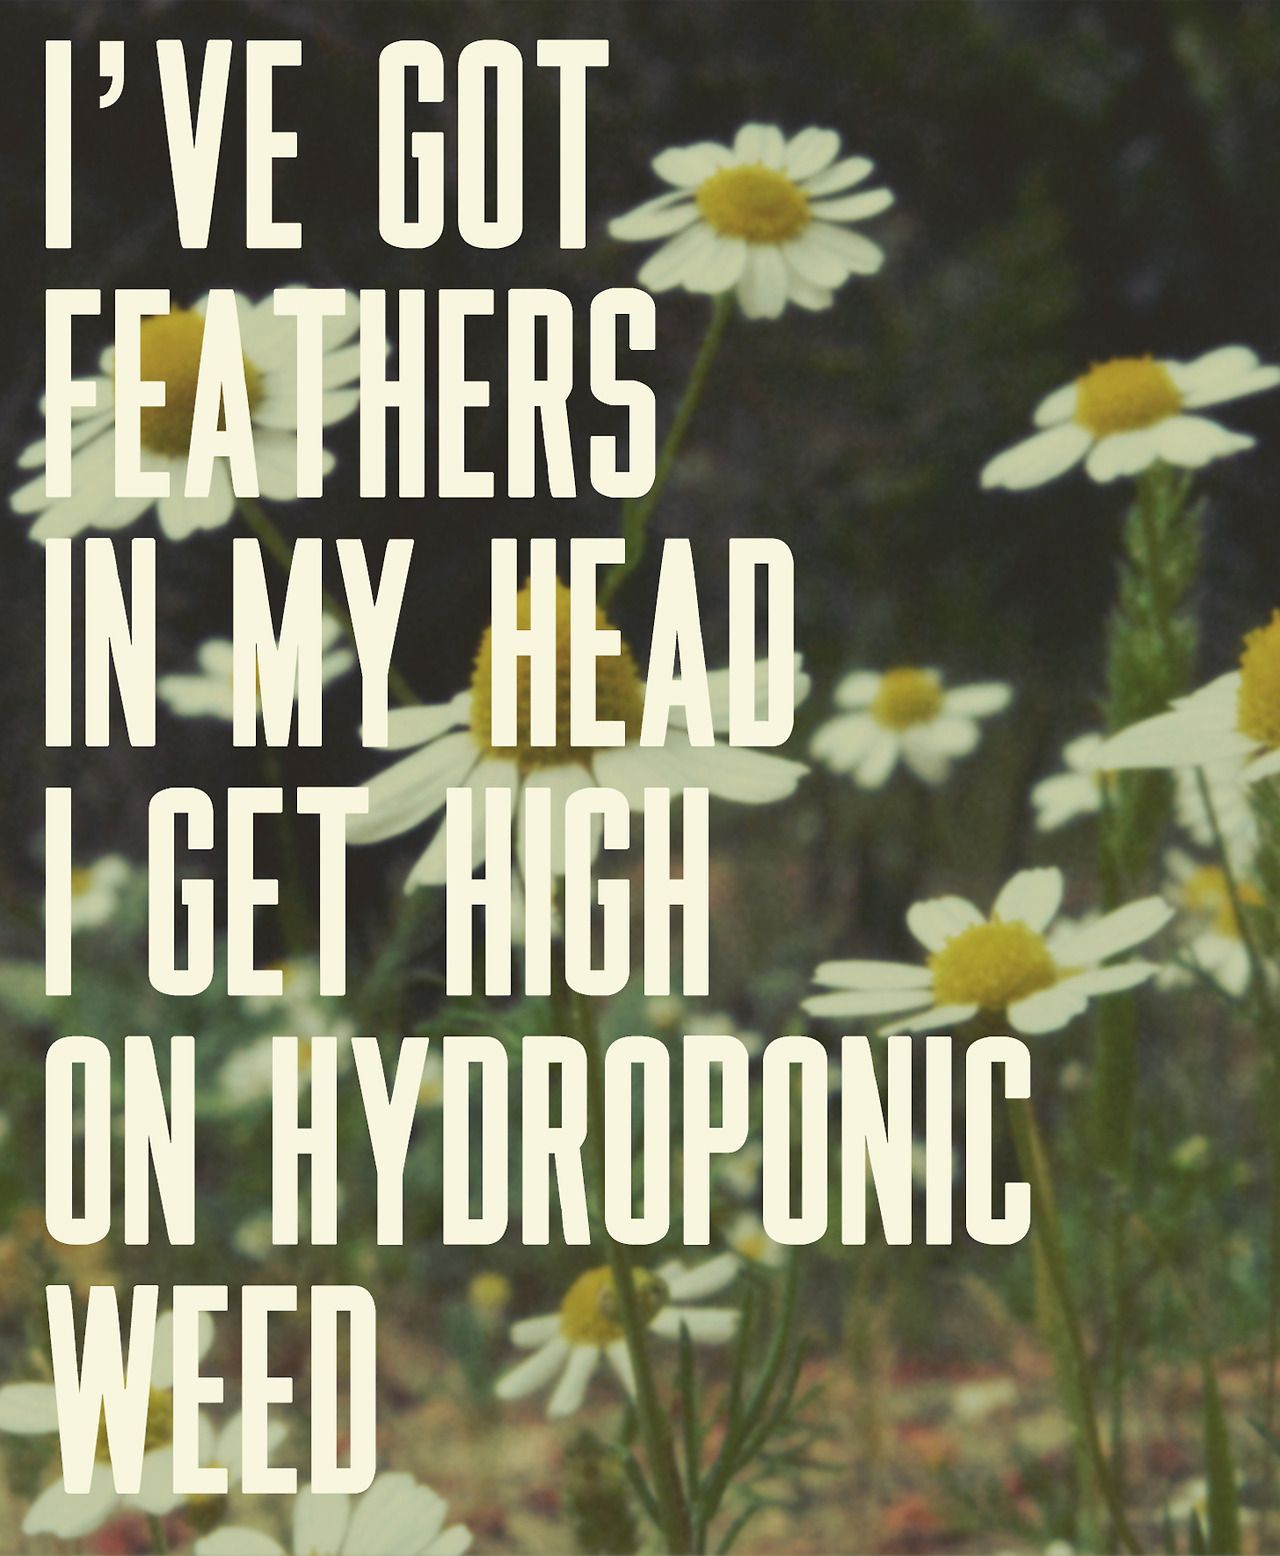 Lana Del Rey – Brooklyn Baby _ Ive got feathers in my hair. I get high on hydroponic weed.